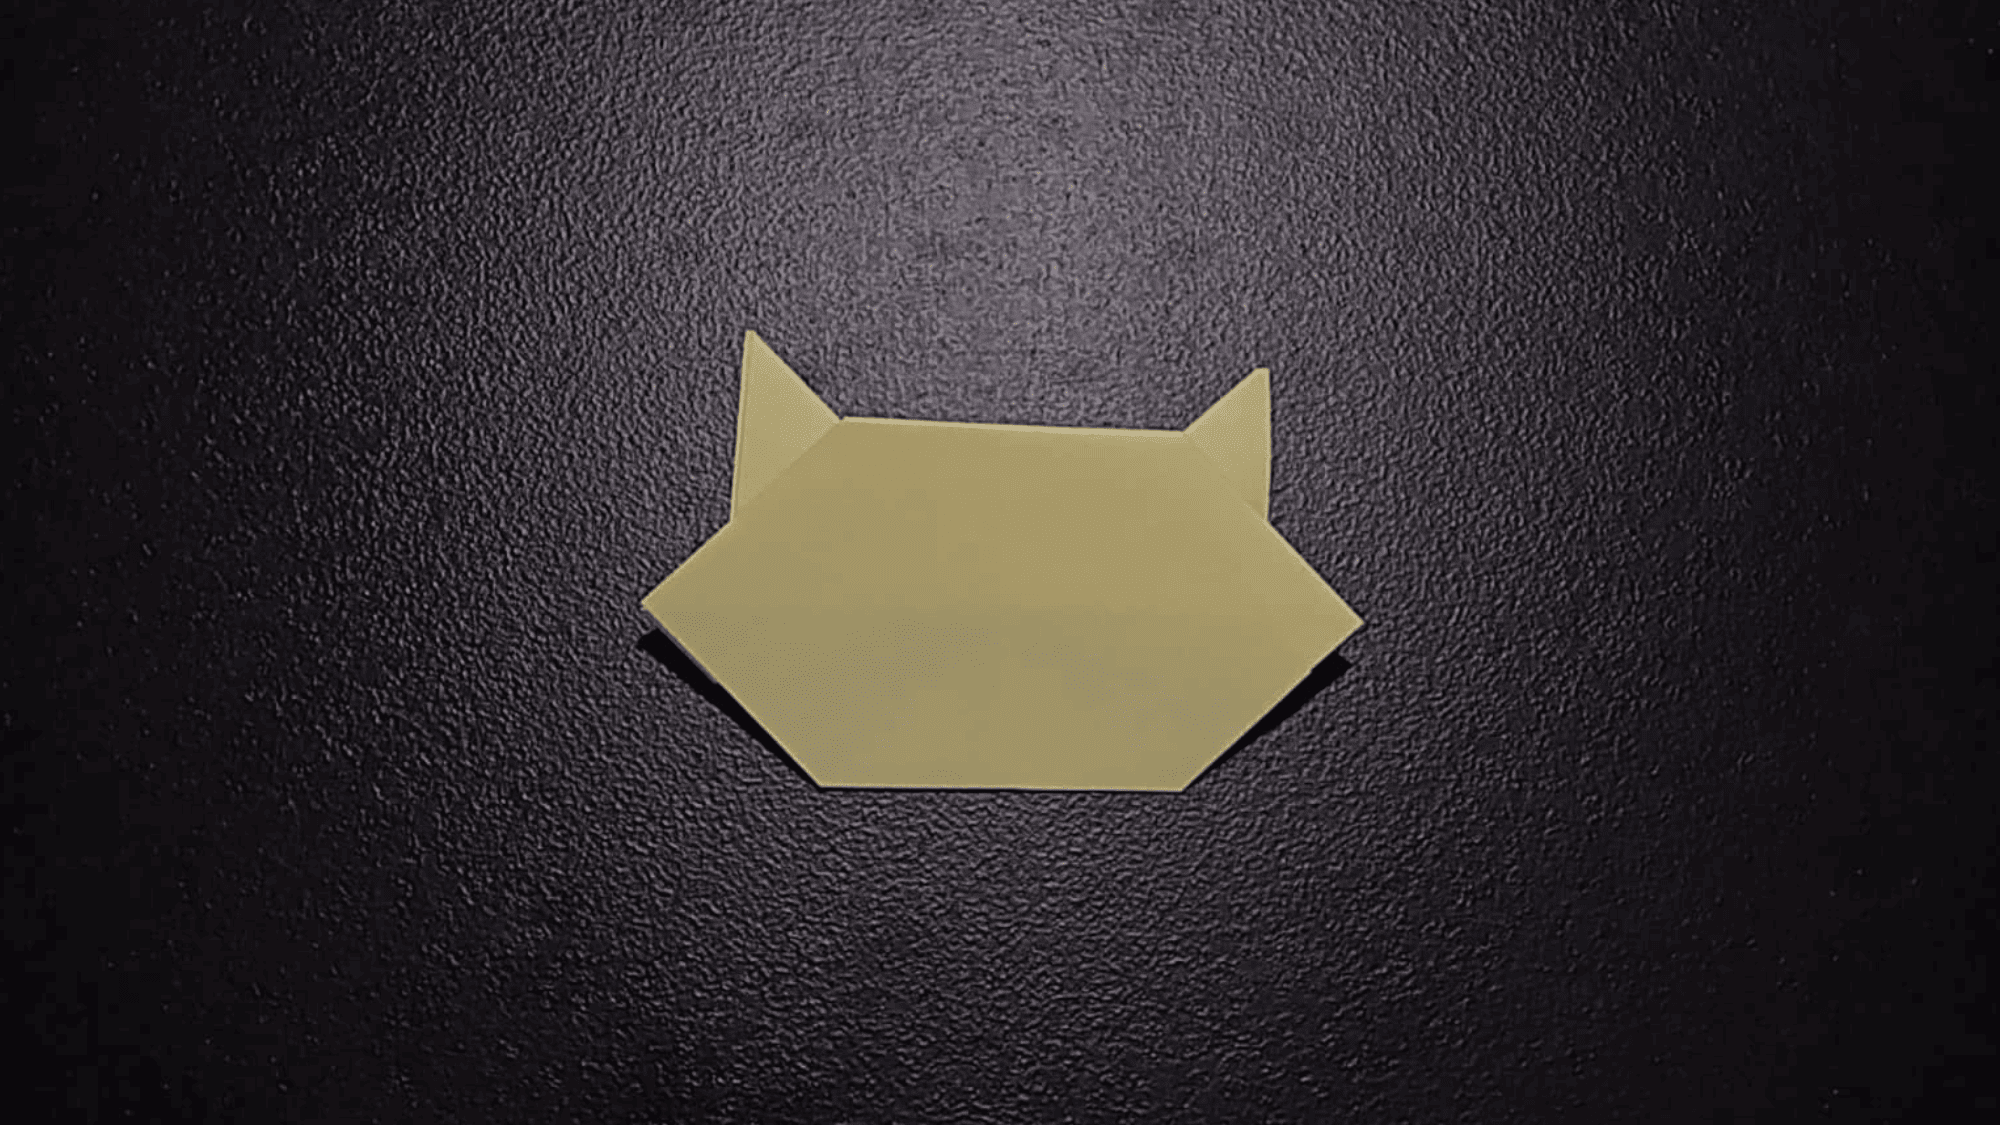 origami cat face instructions step 10